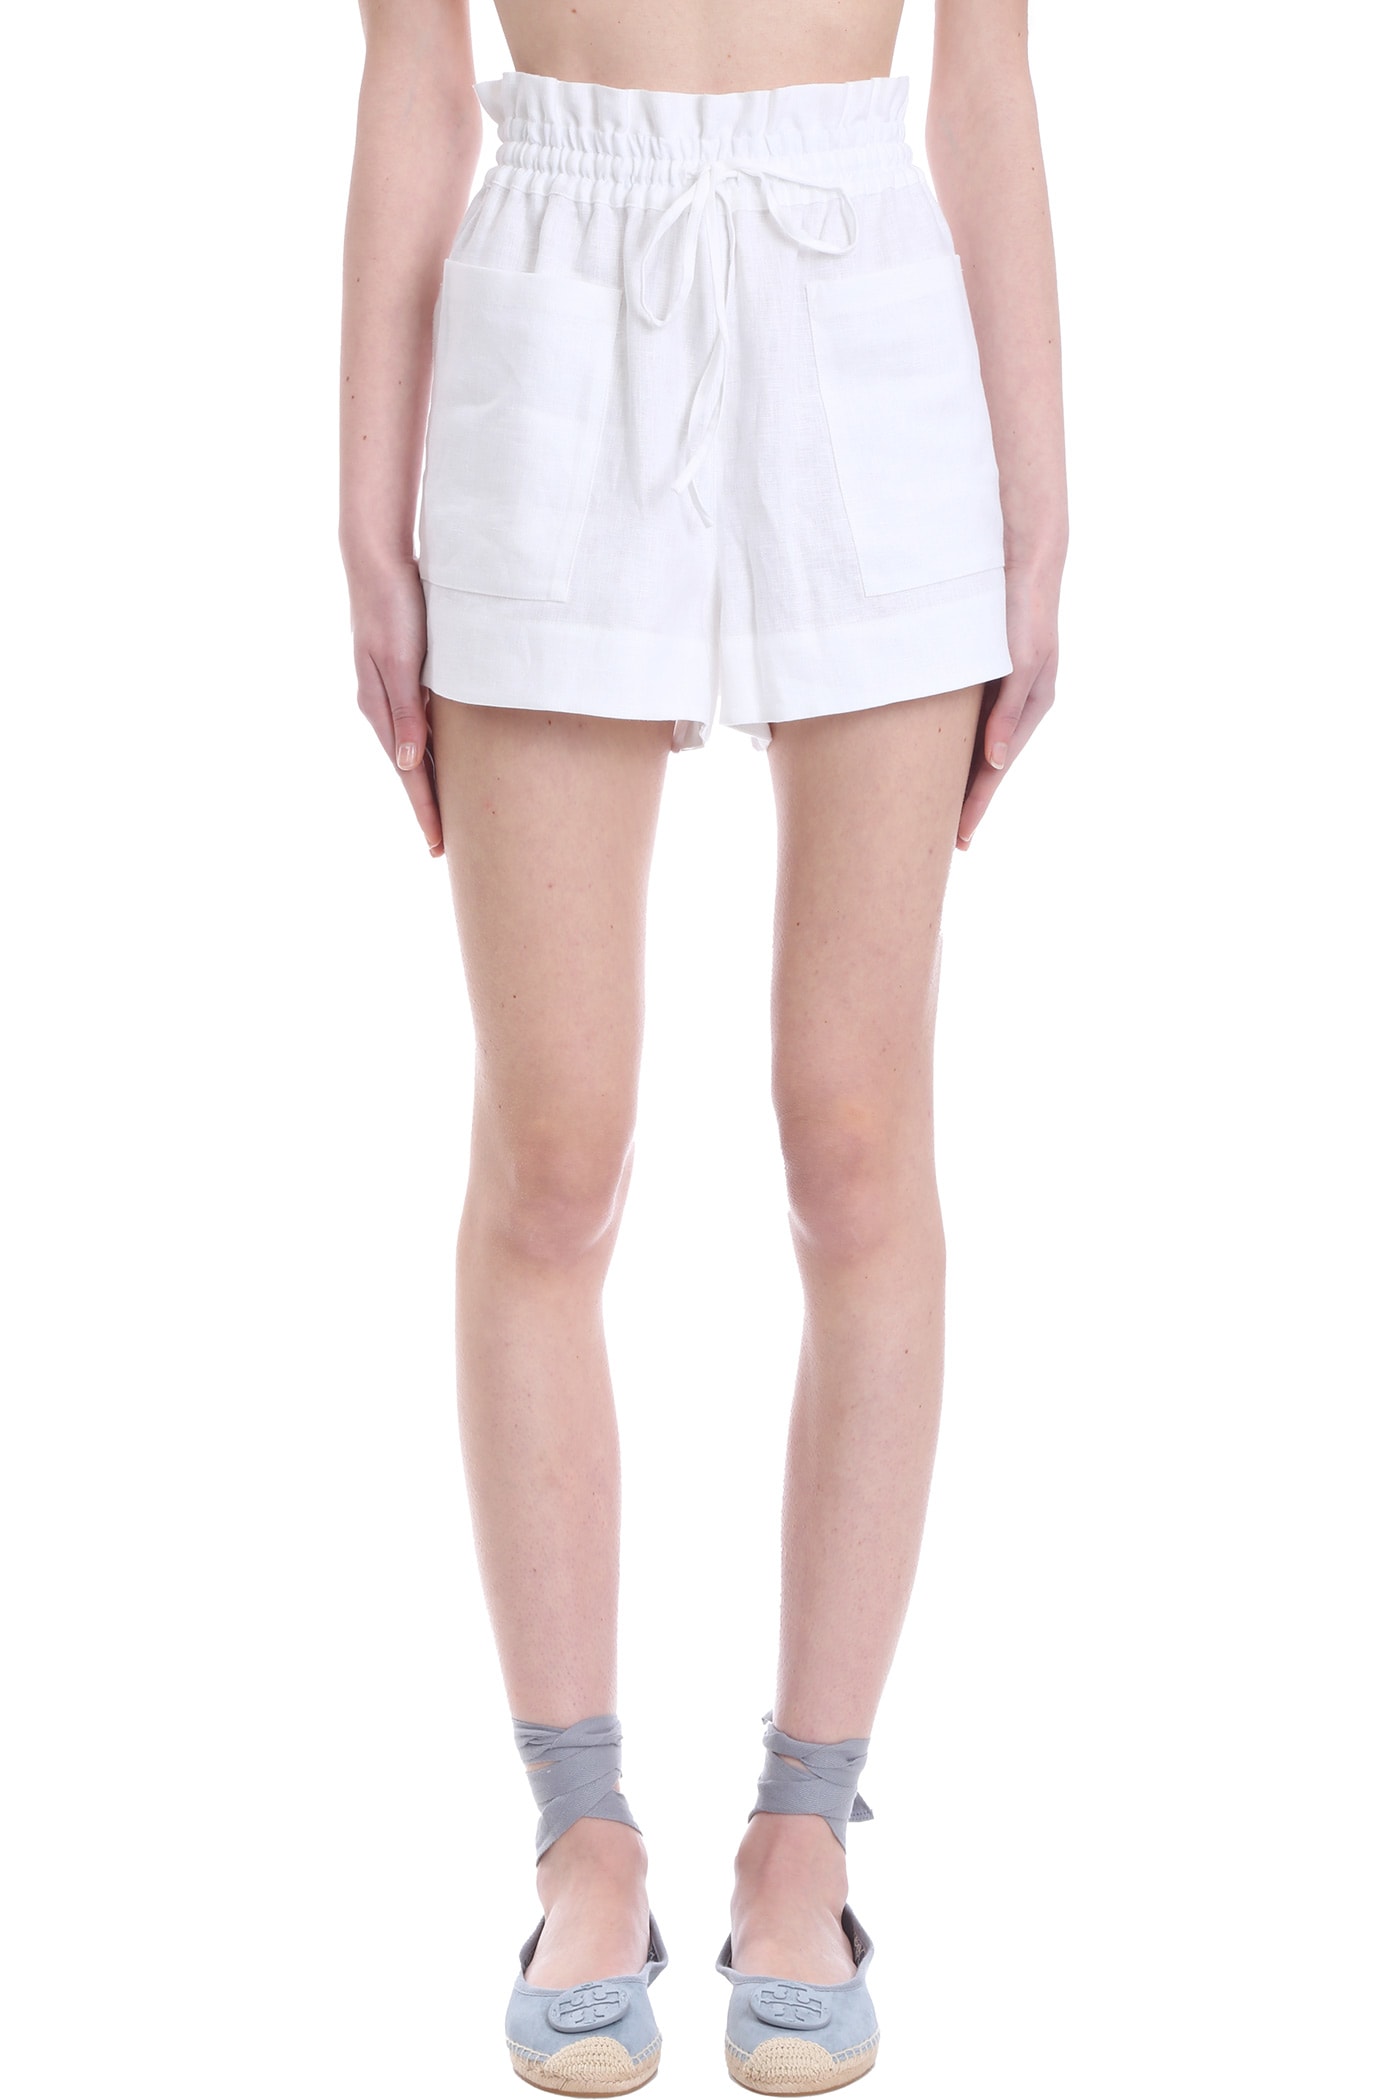 Tory Burch Shorts In White Linen